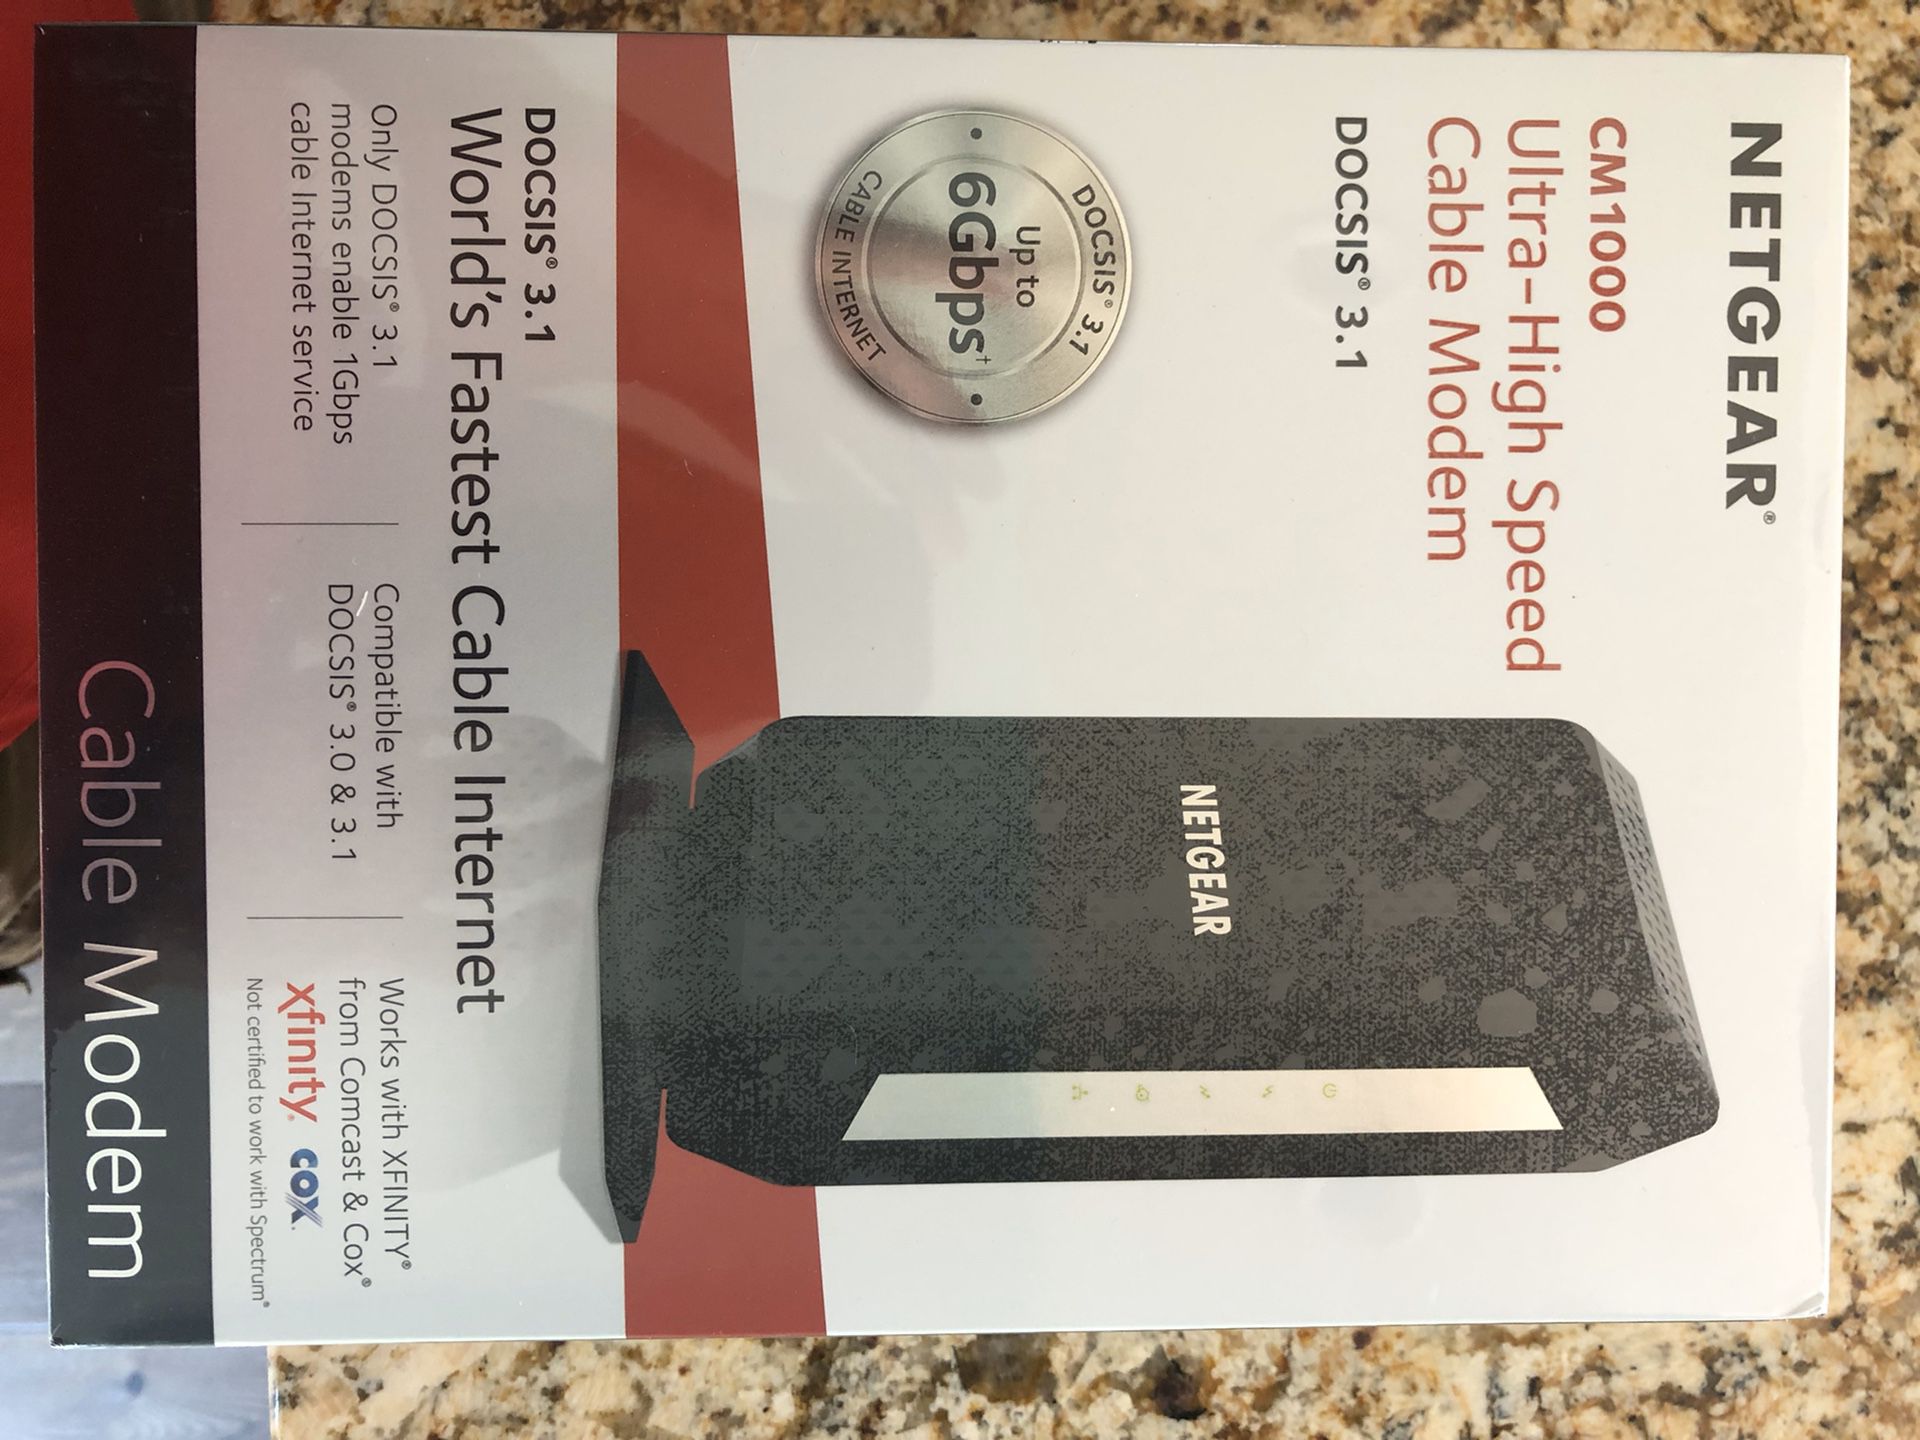 NETGEAR DOCSIS 3.1 Gigabit Cable Modem. Max download speeds of 6.0 Gbps, For XFINITY by Comcast, Spectrum, and Cox. Compatible with Gig-Speed from Xf